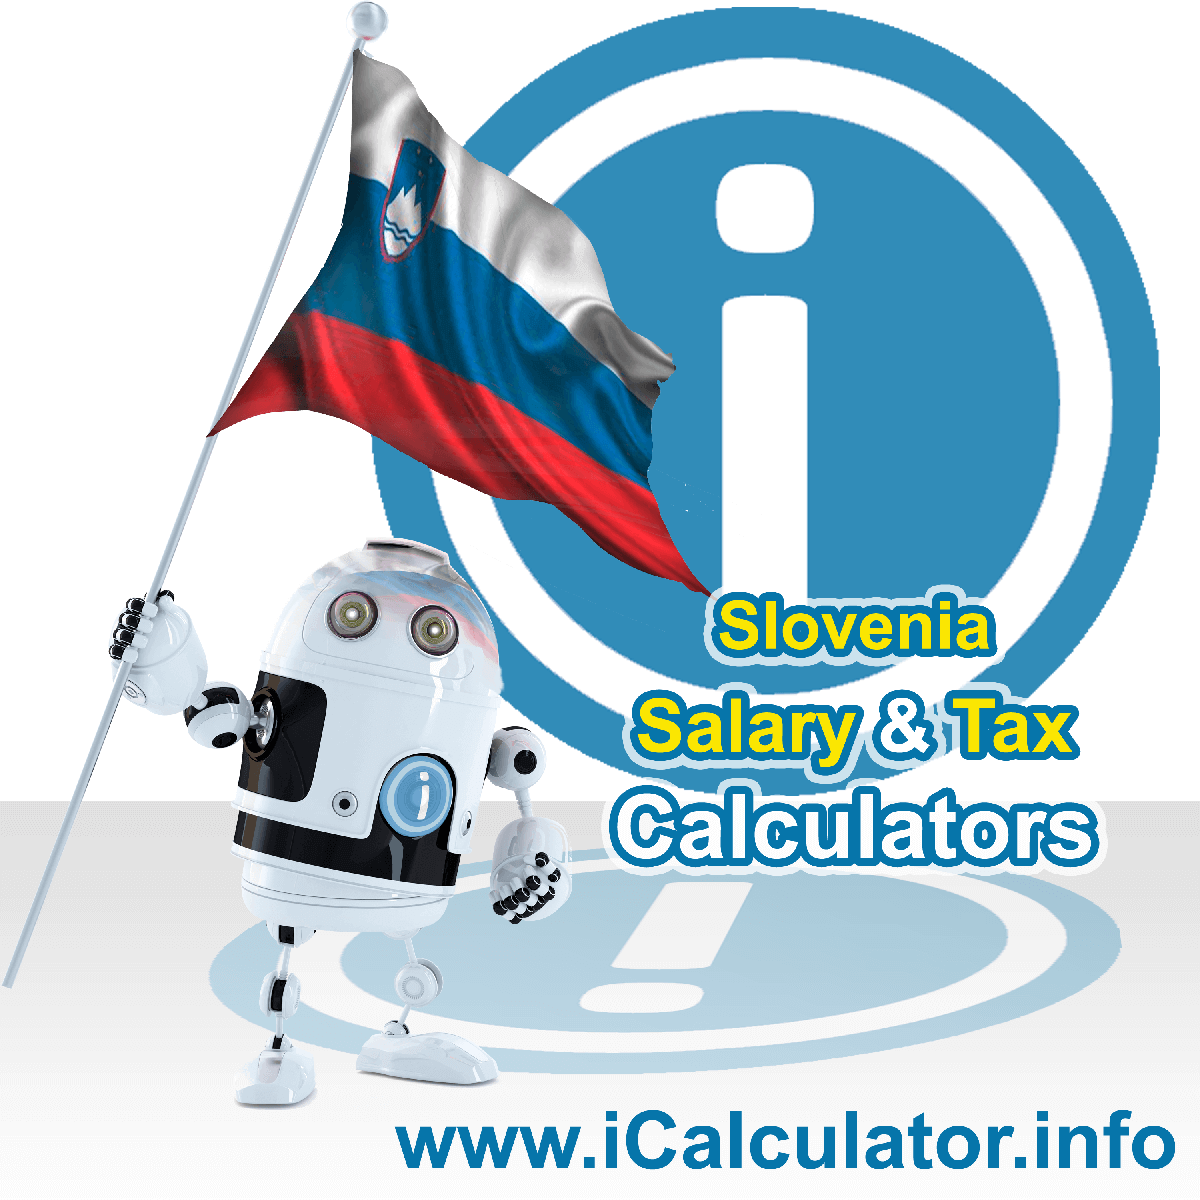 Slovenia Tax Calculator. This image shows the Slovenia flag and information relating to the tax formula for the Slovenia Salary Calculator